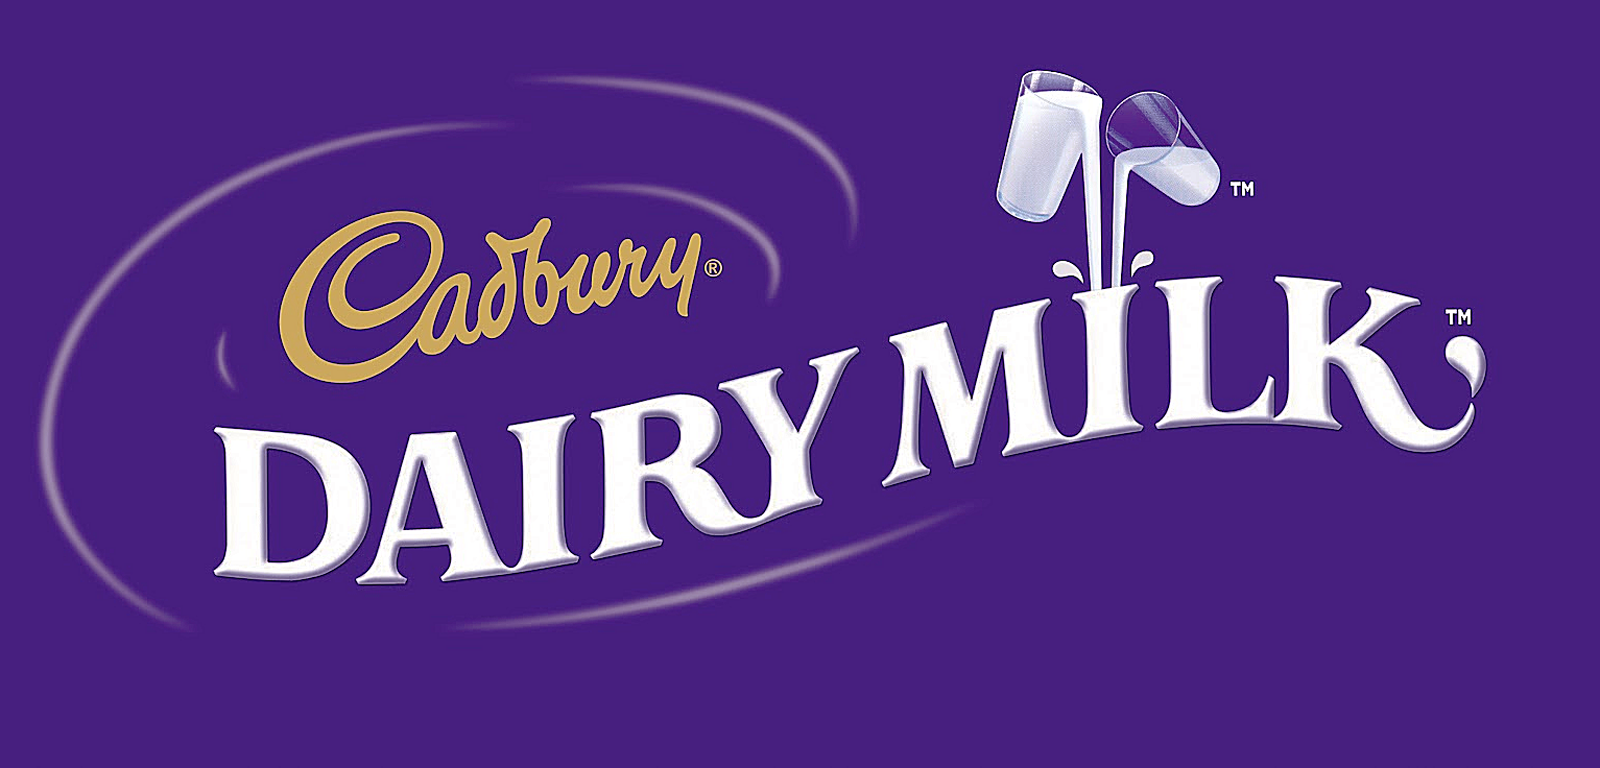 Free download Dairy Milk Chocolate Wallpaper Daily Background